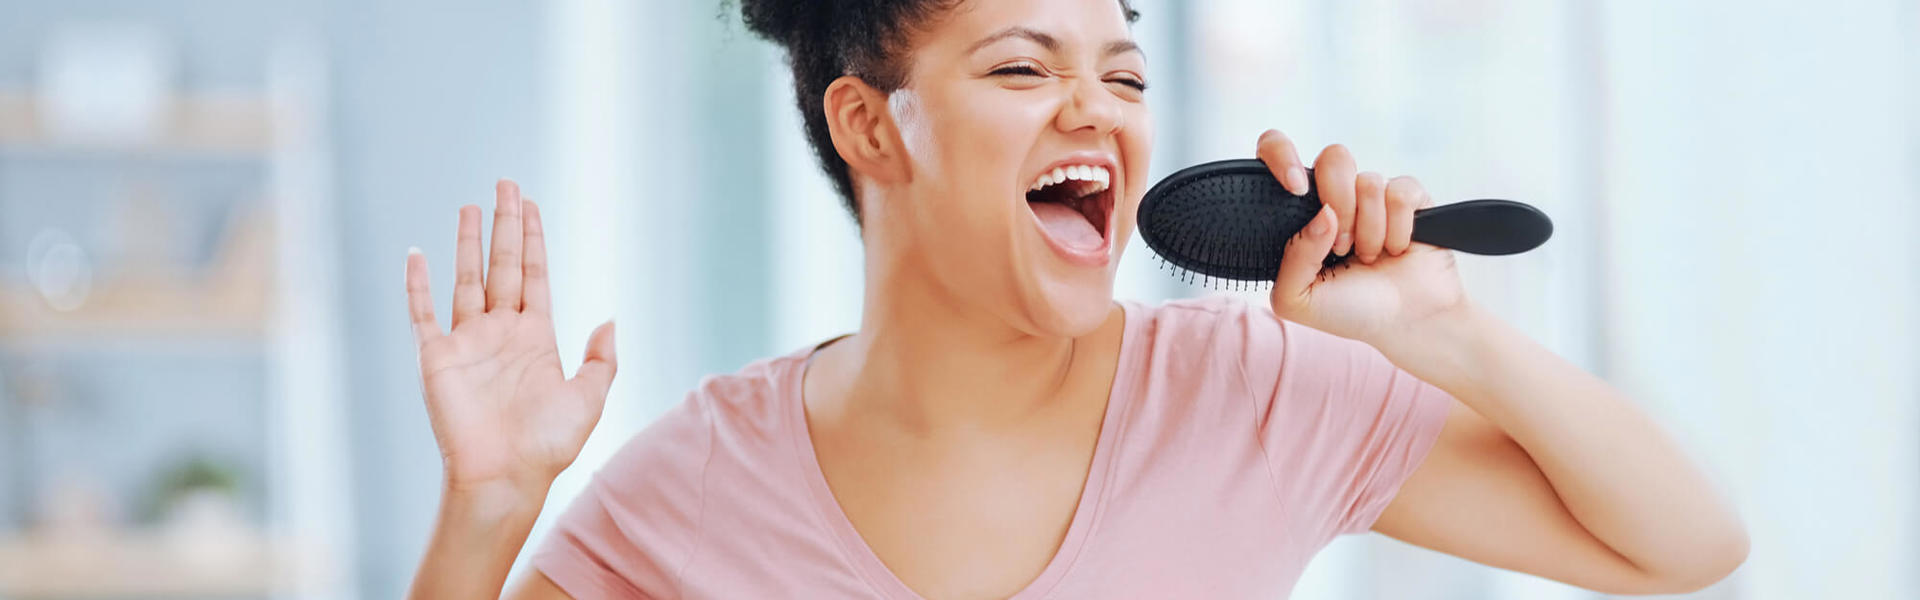 A woman singing into a hair brush